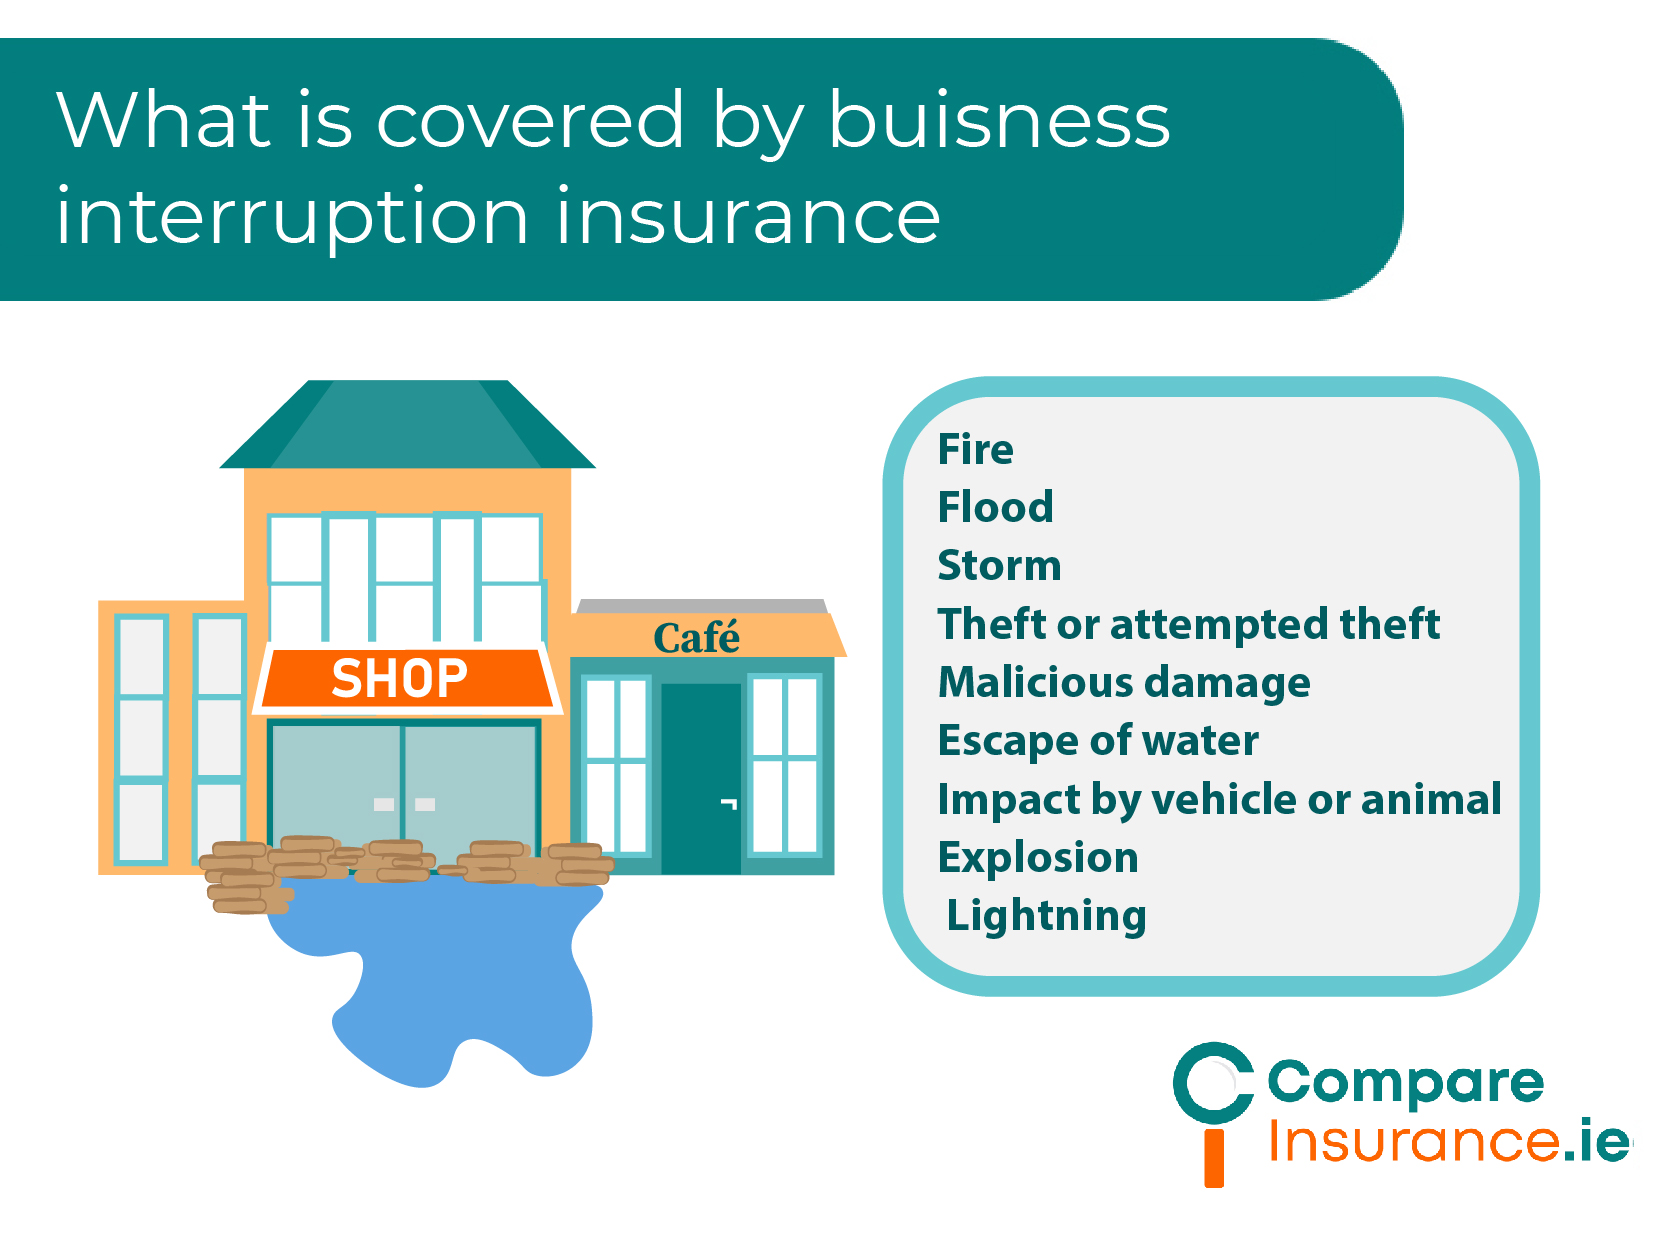 What does Business interruption insurance cover